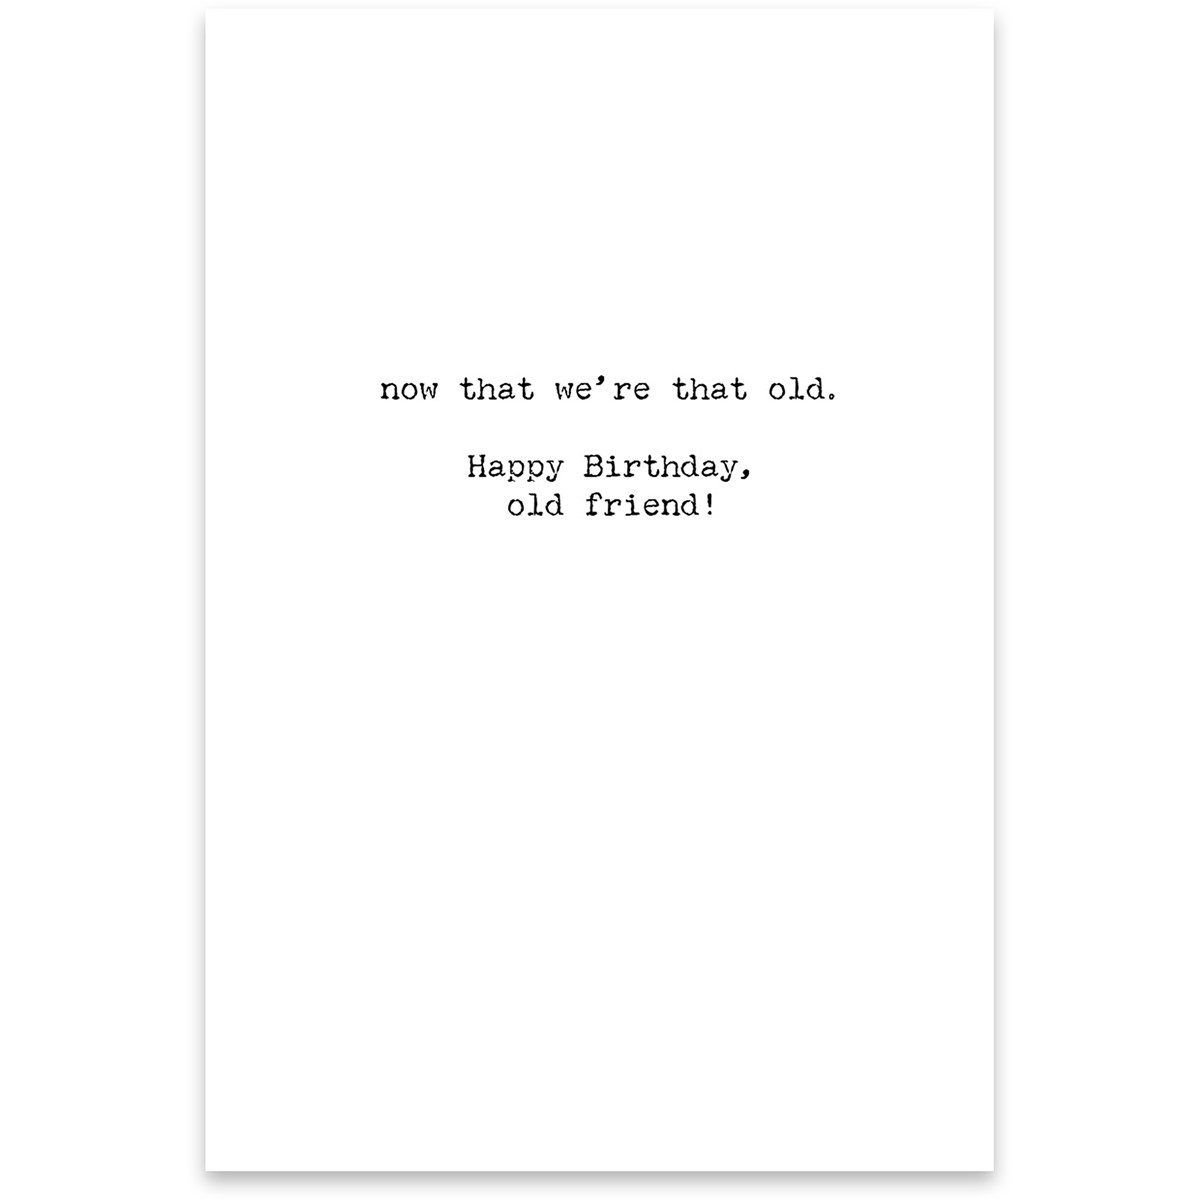 Greeting Card - Being Old Doesn't Seem So Old - 4.75" x 7" - Paper